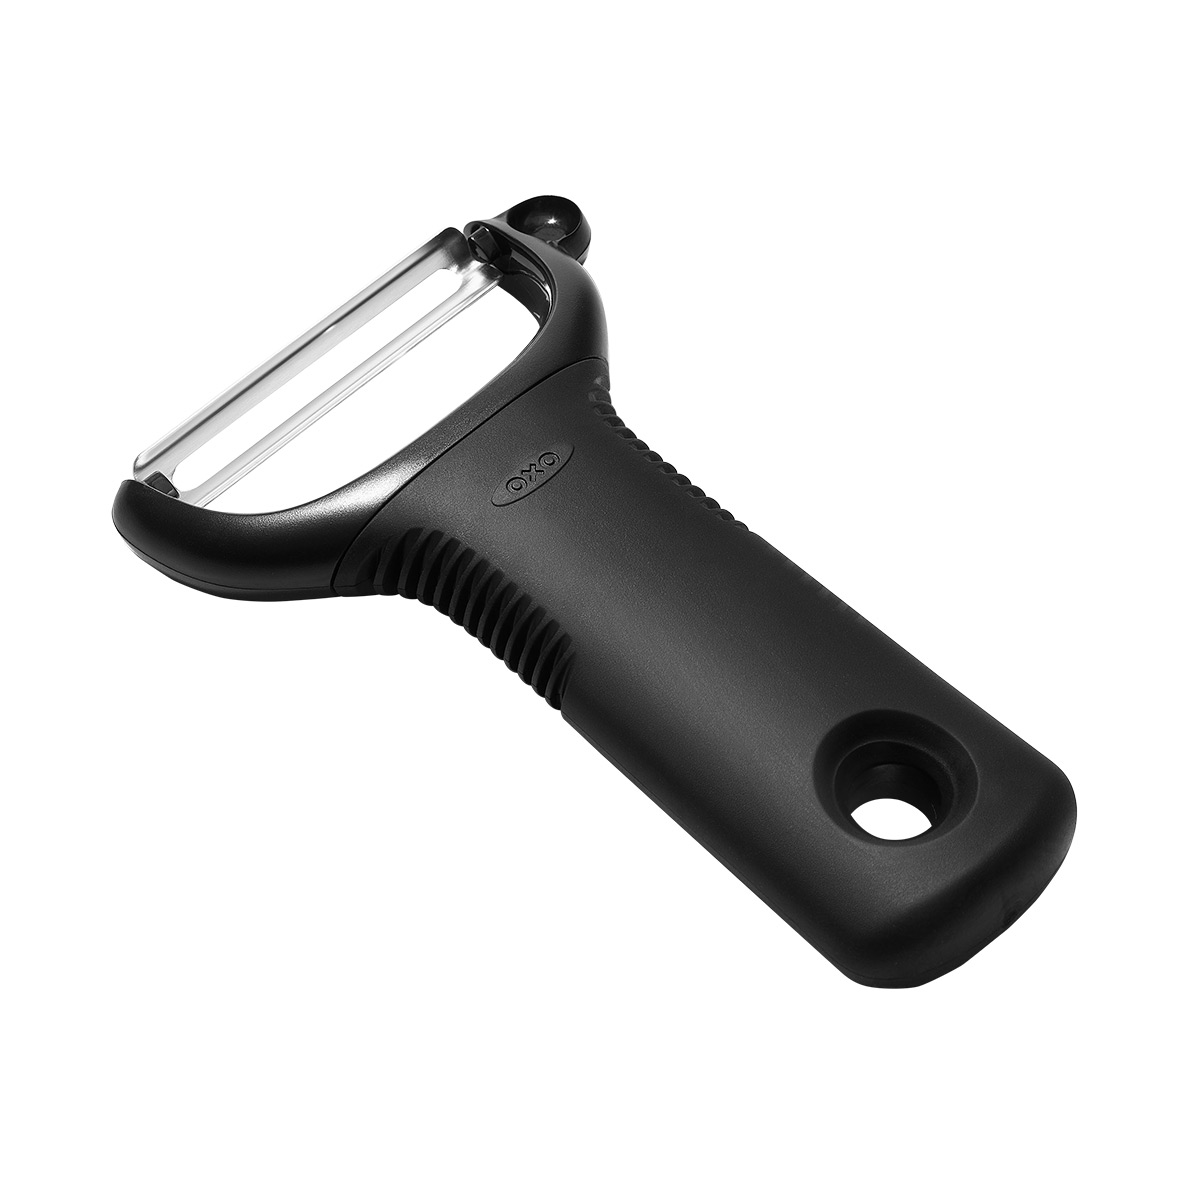 https://www.containerstore.com/catalogimages/490711/10095534-oxo-gg_21081_1-y-peeler-ven.jpg